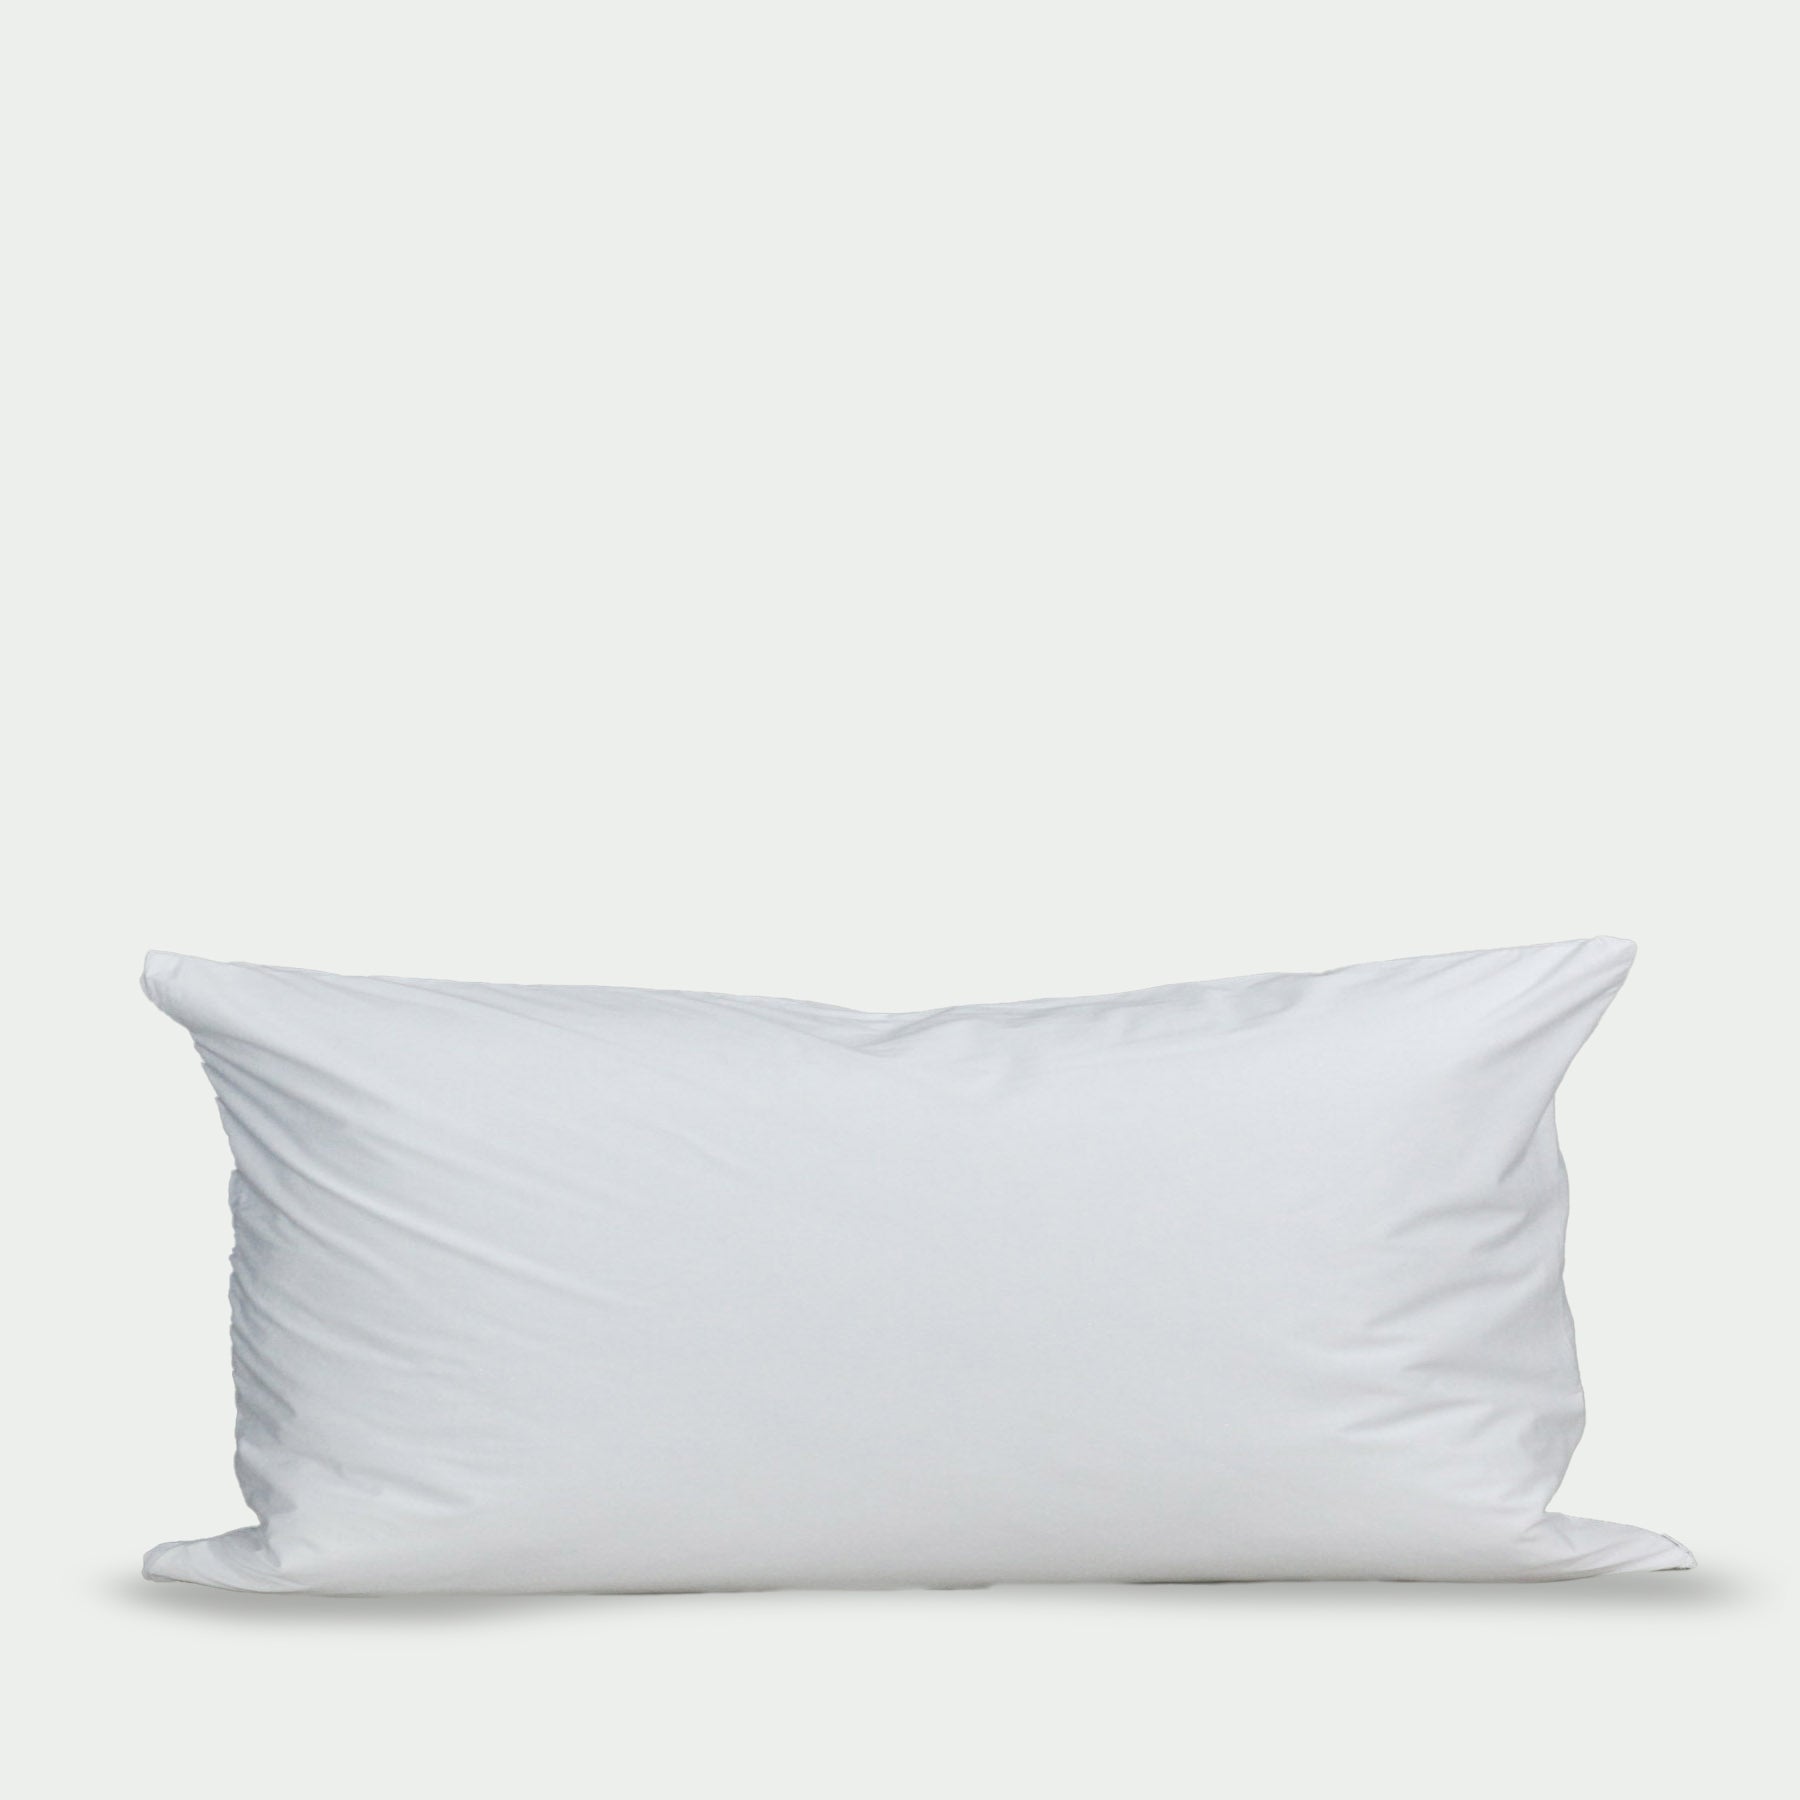 Essential Body Pillow Pillow Protector